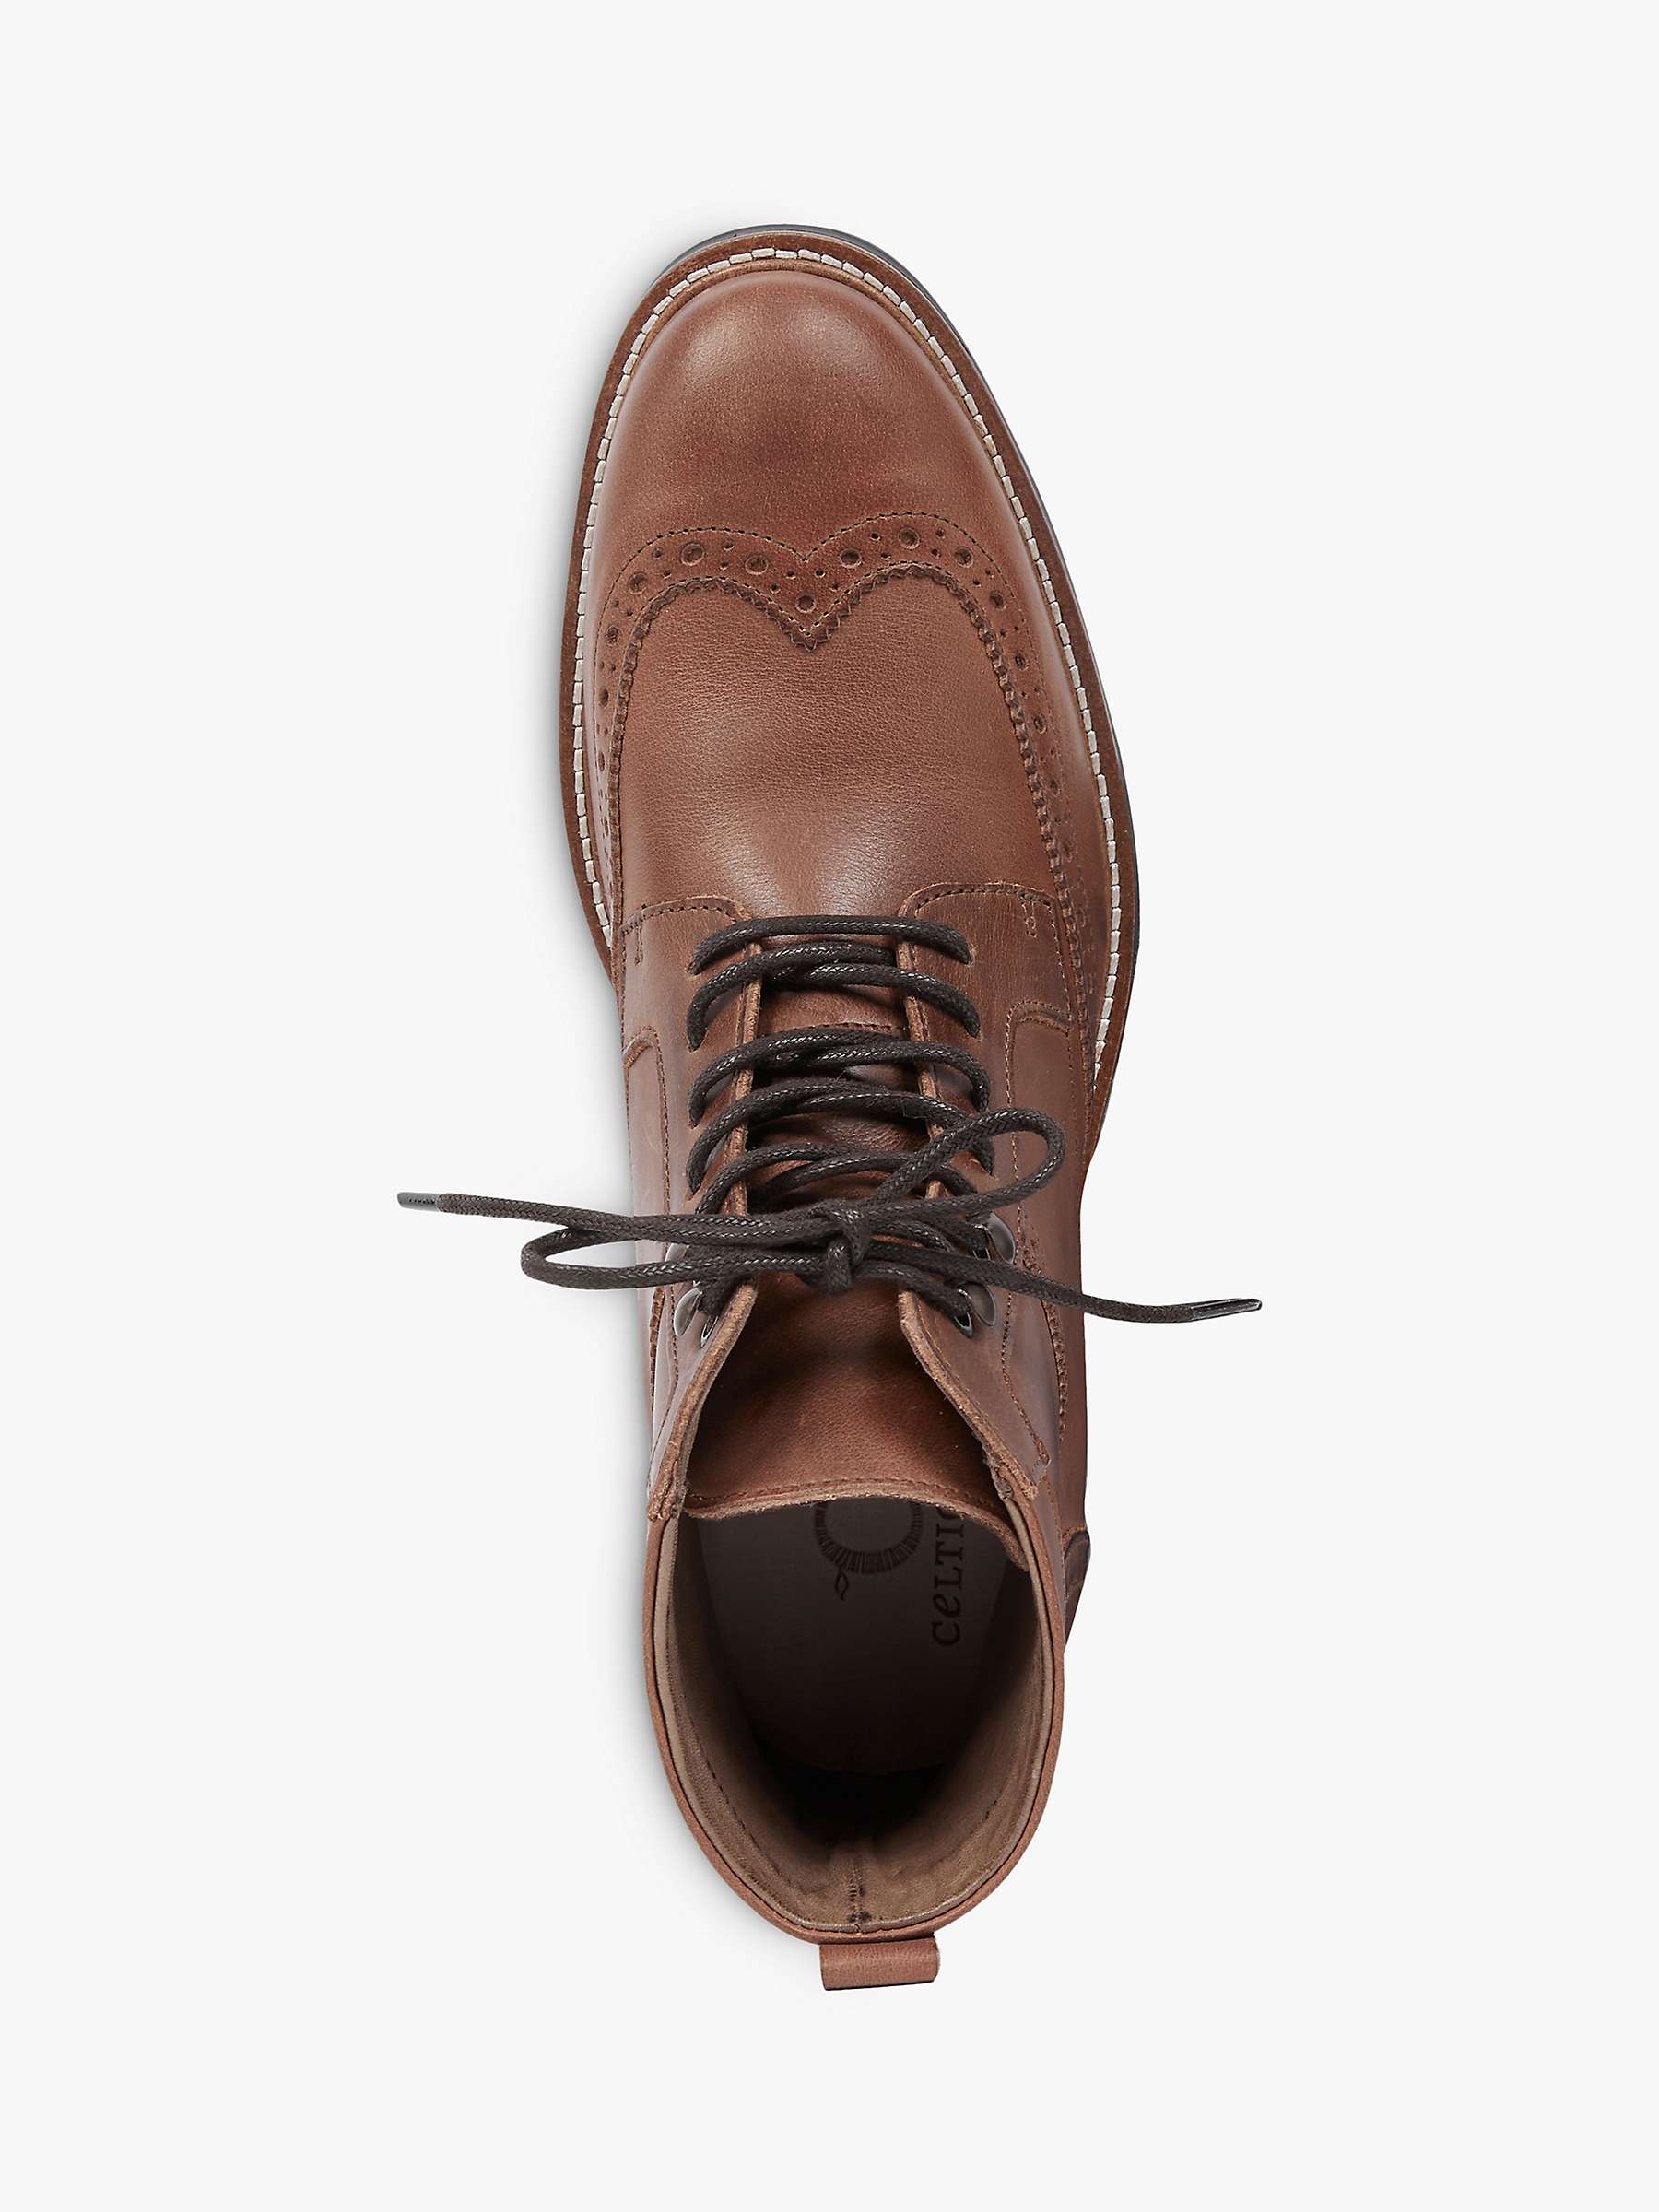 Buy Celtic & Co. Lace Up Brogue Boot, Tan Online at johnlewis.com